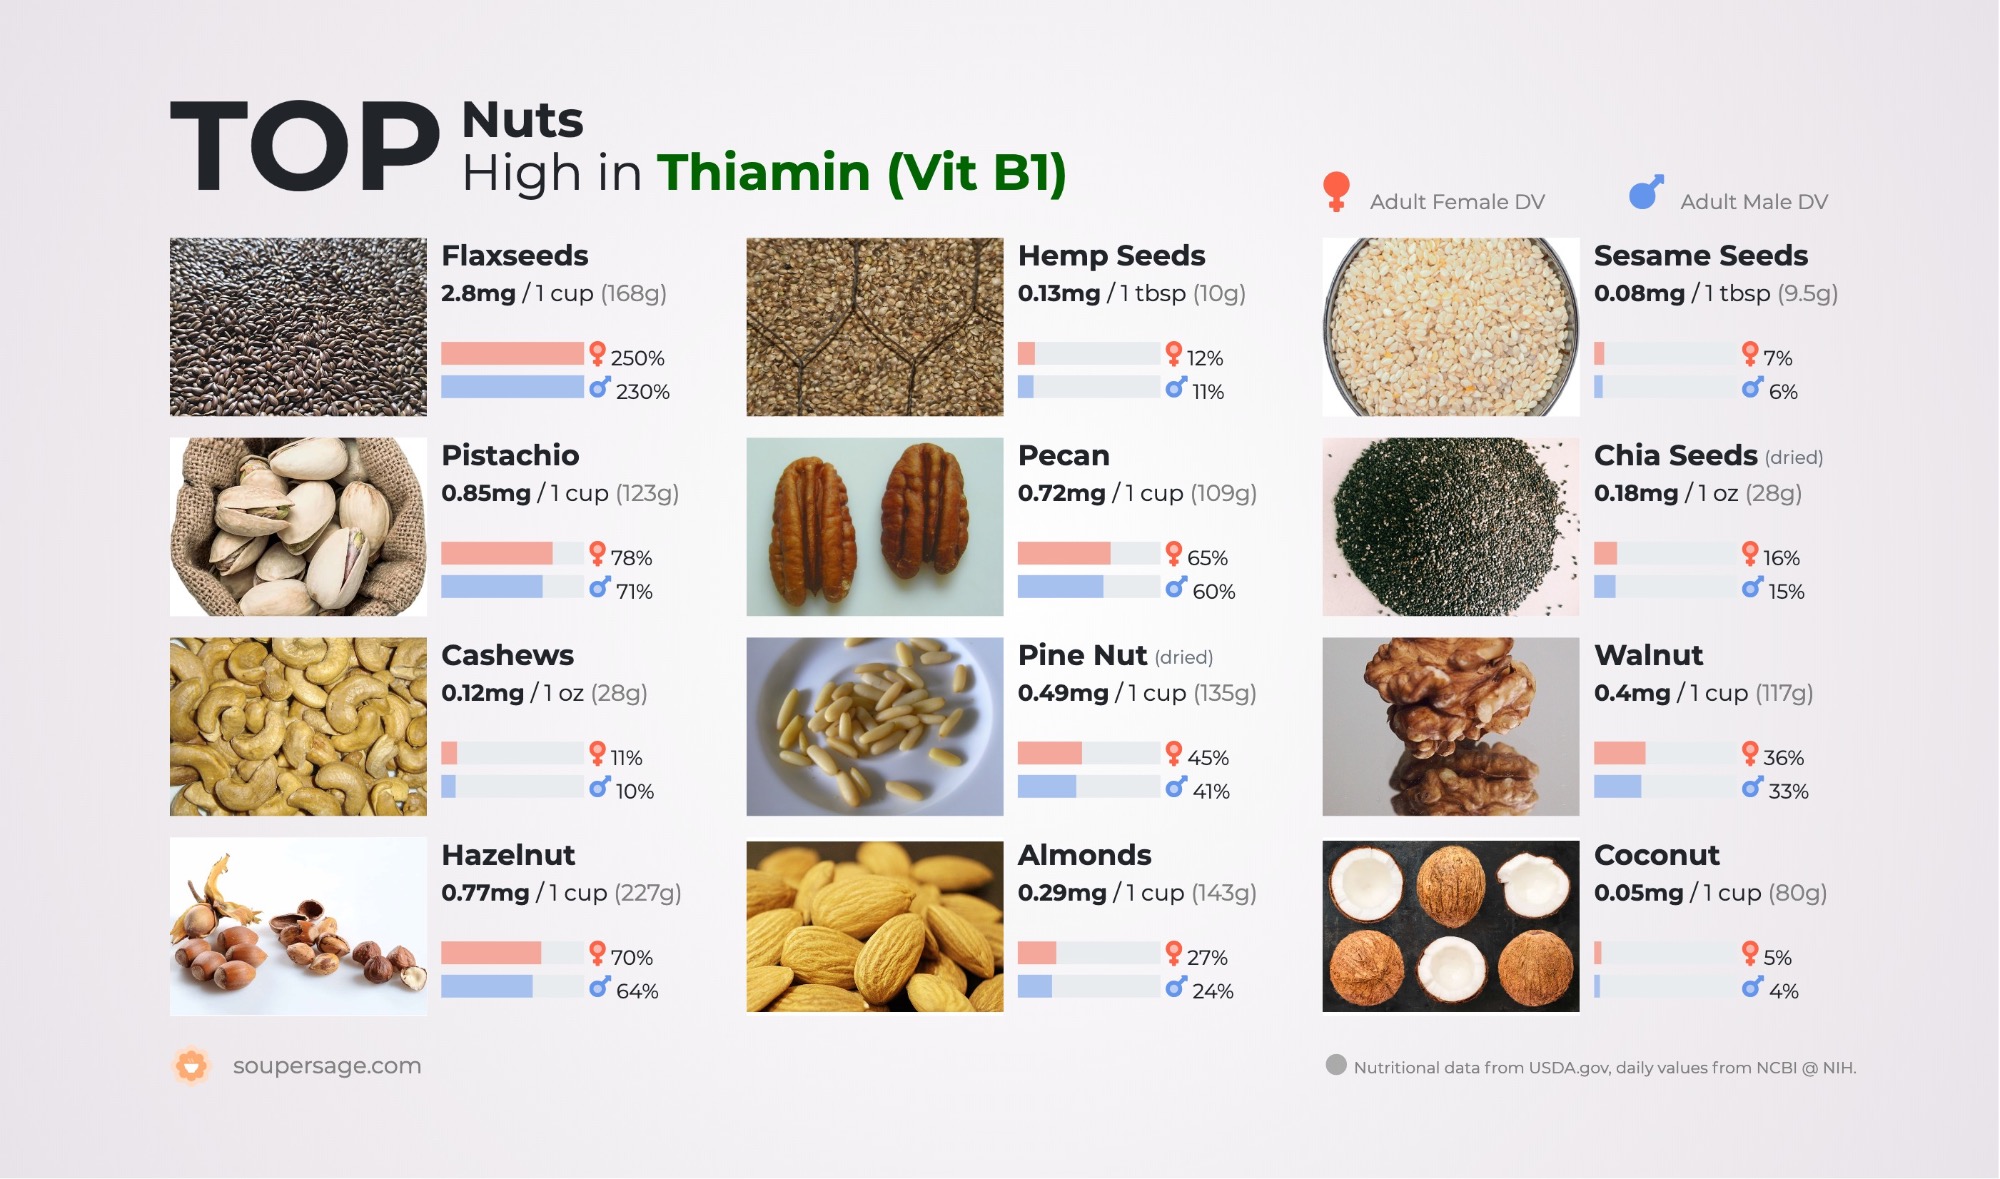 image of Top Nuts High in Thiamin (Vit B1)